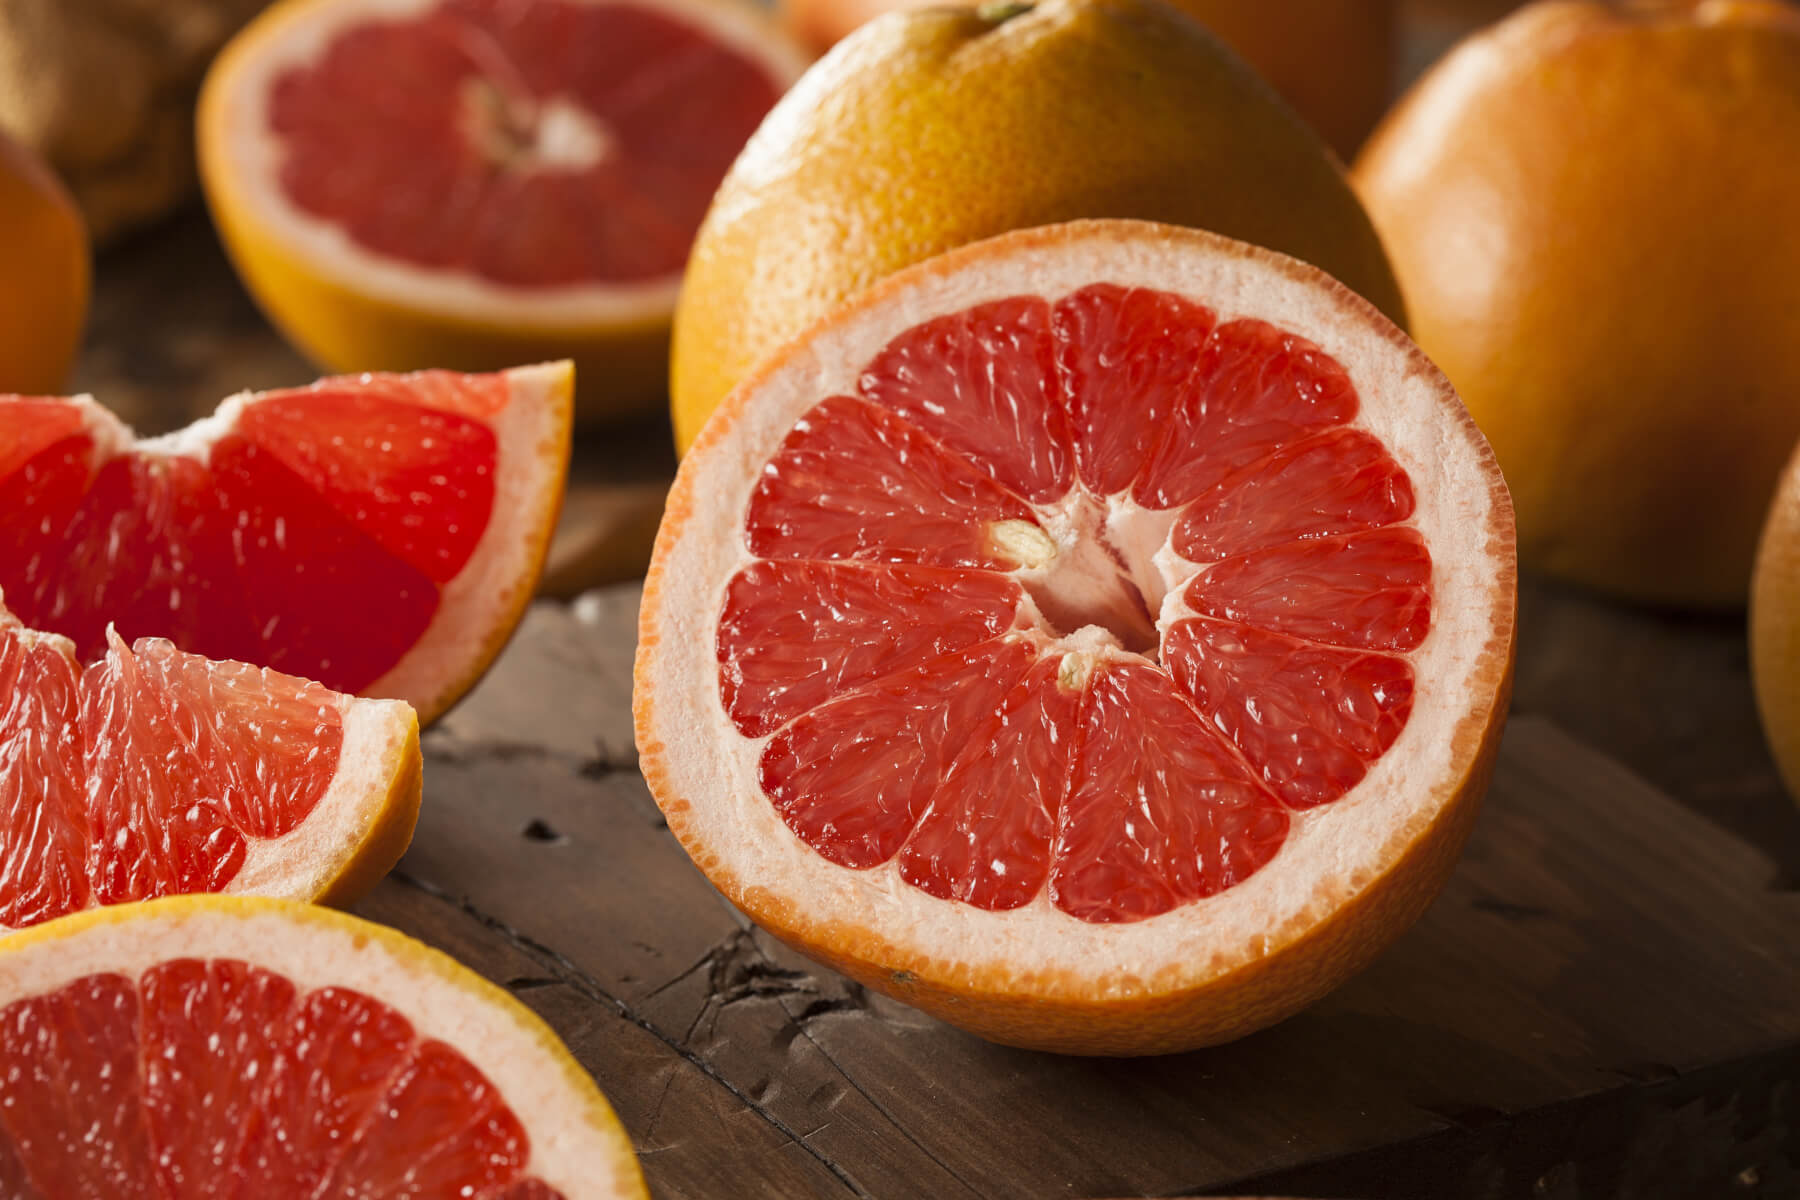 A Symphony of Flavor and Health: The Organic Grapefruit Story